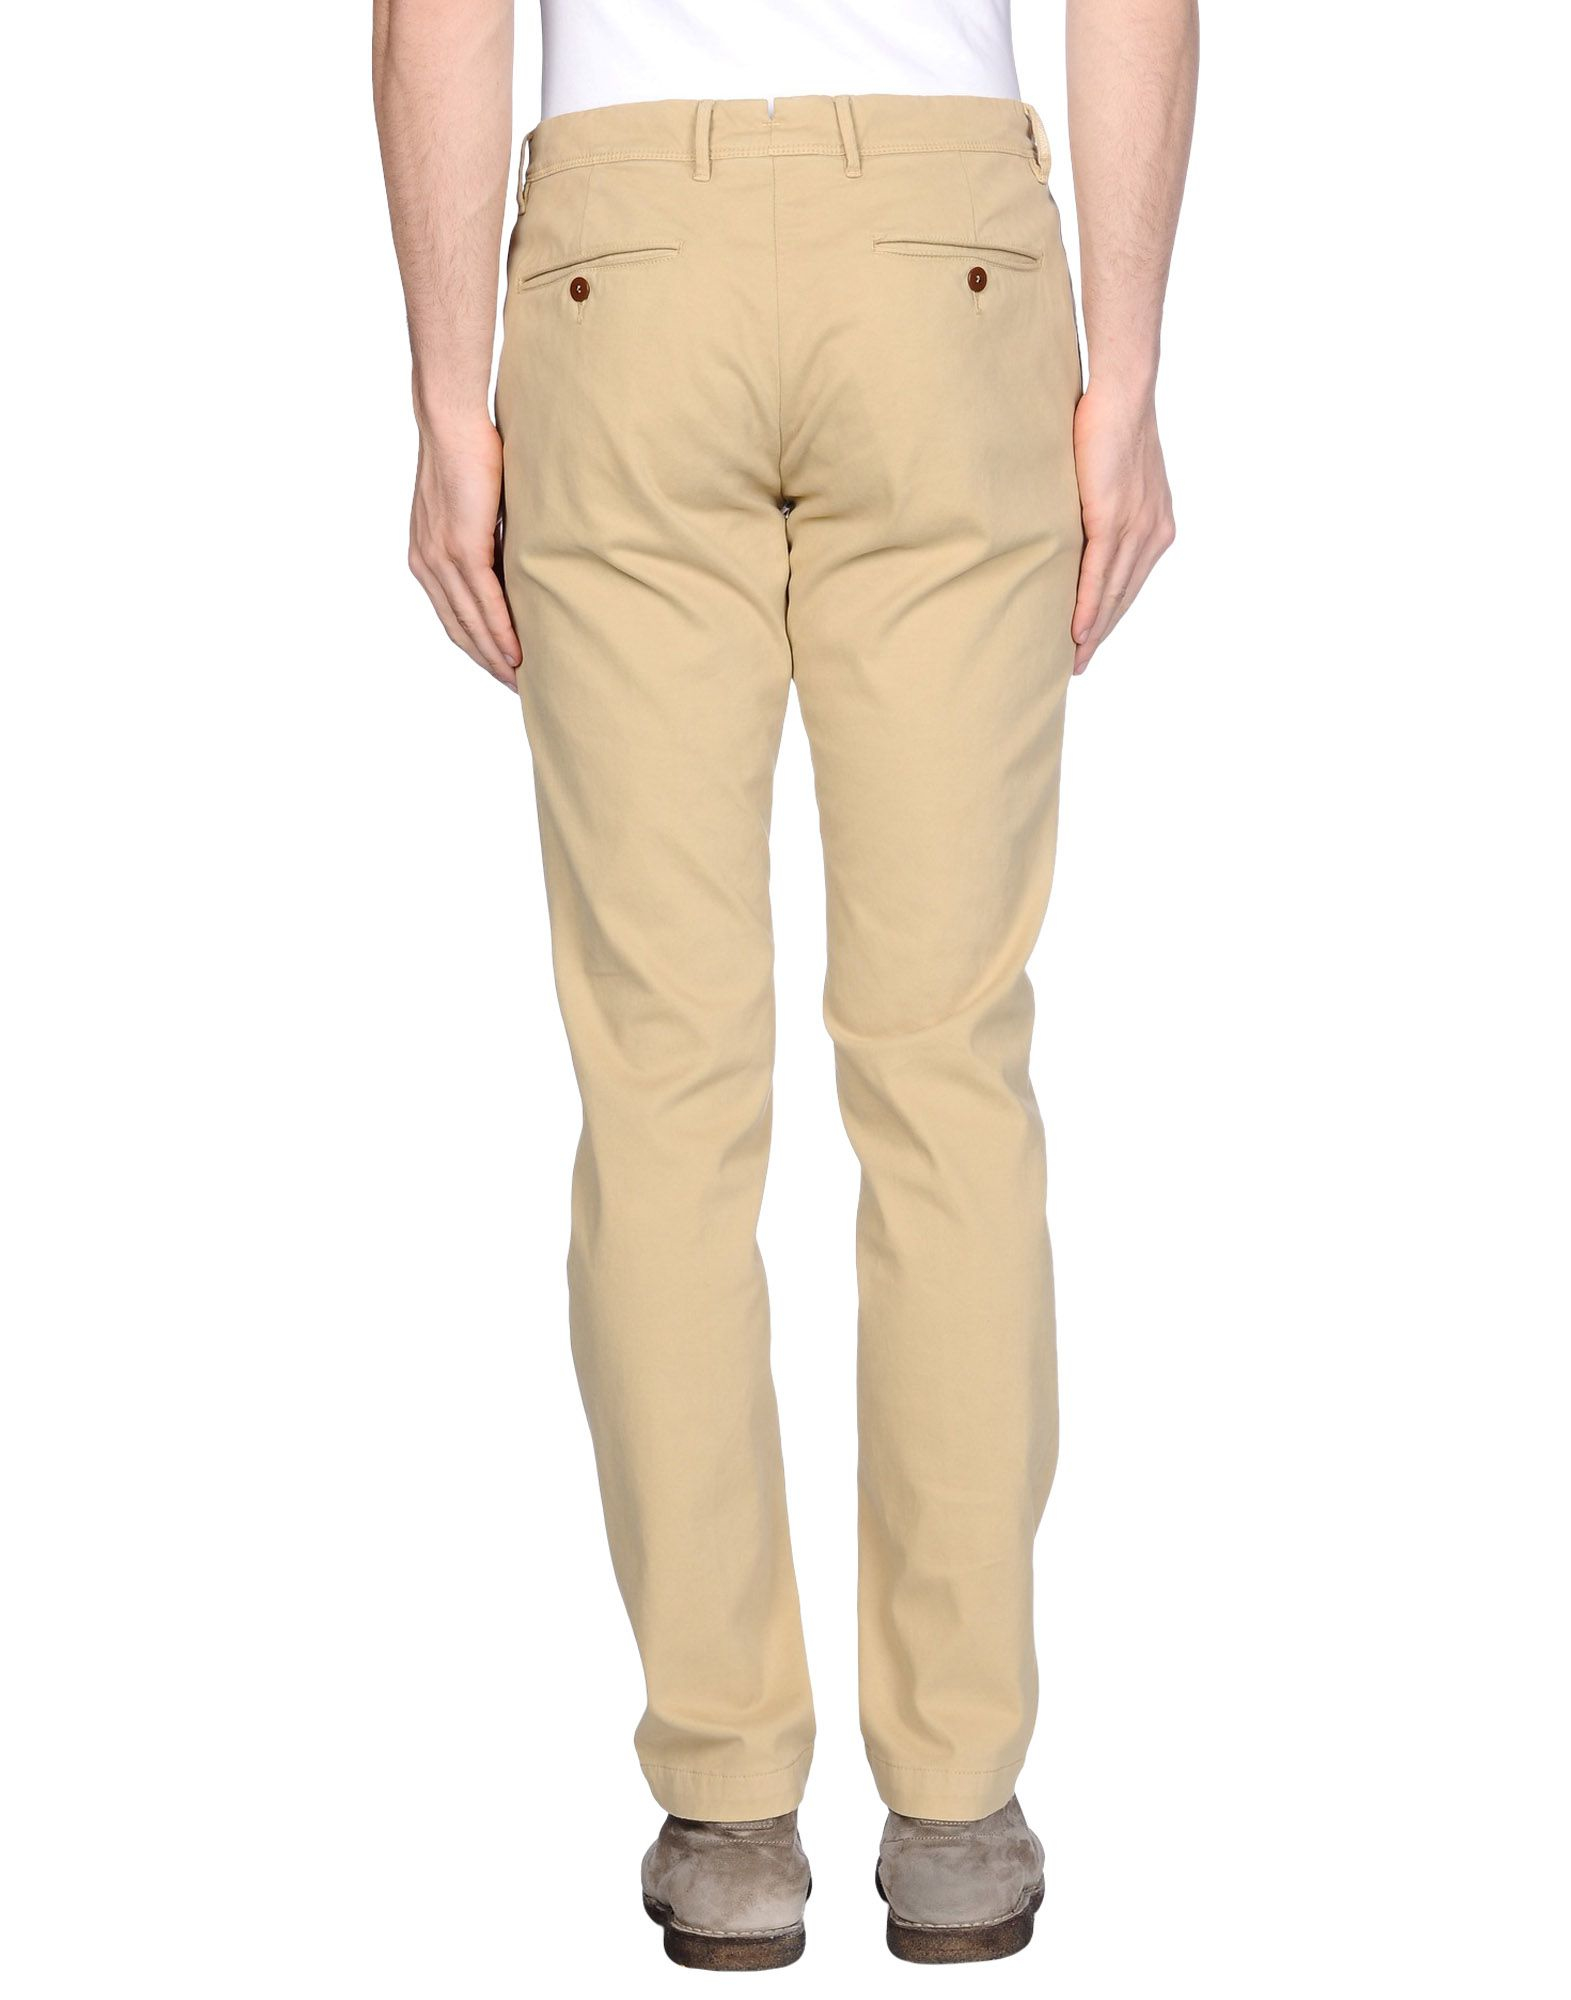 C P Company Casual Trouser in Natural for Men - Lyst